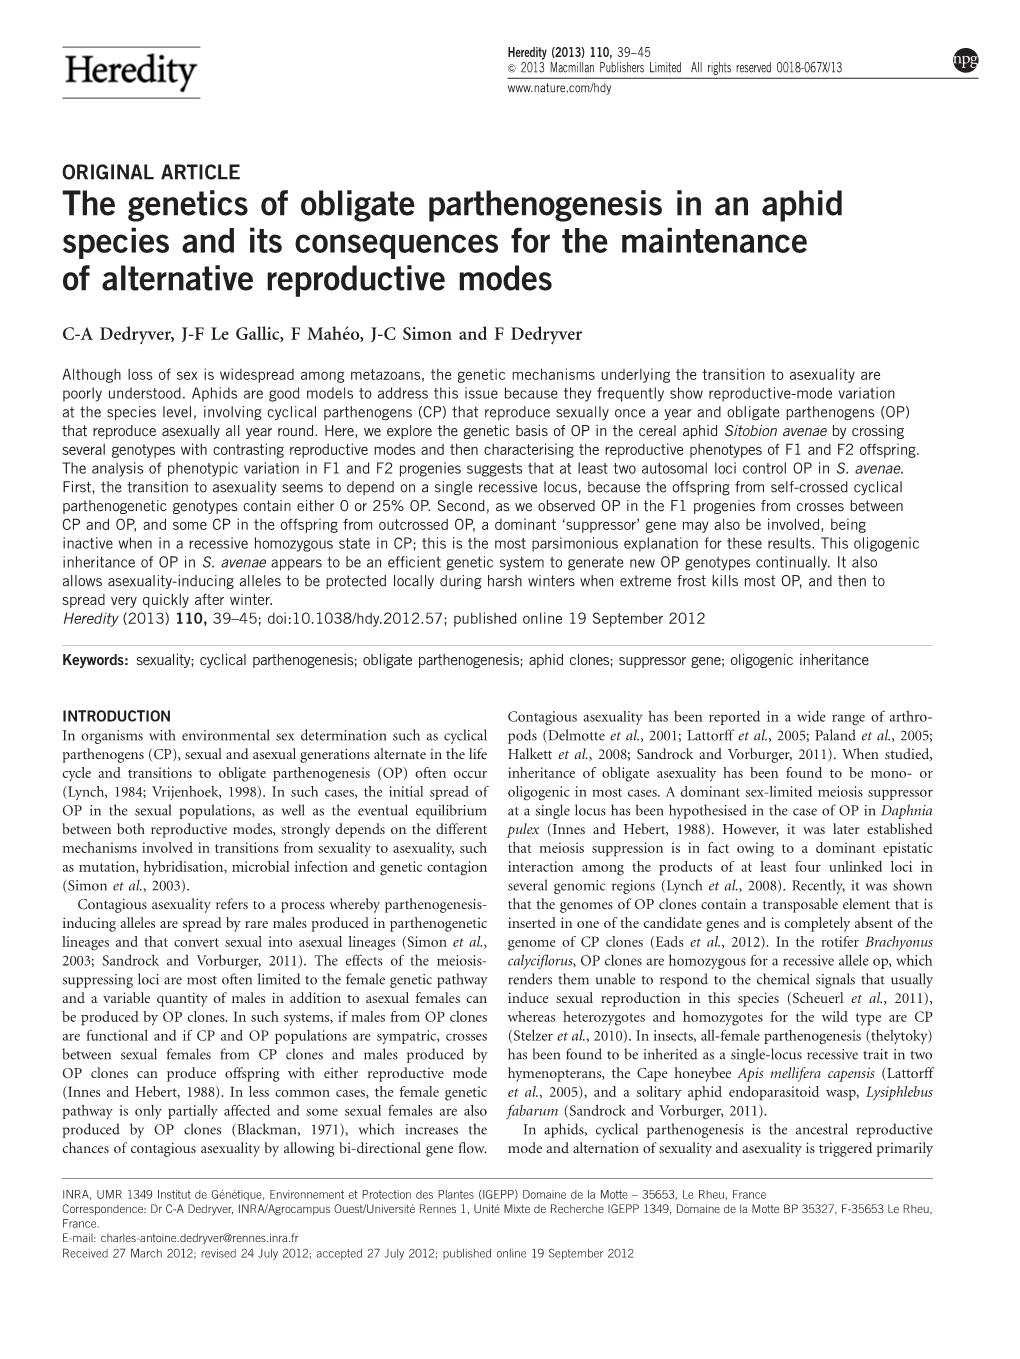 The Genetics of Obligate Parthenogenesis in an Aphid Species and Its Consequences for the Maintenance of Alternative Reproductive Modes